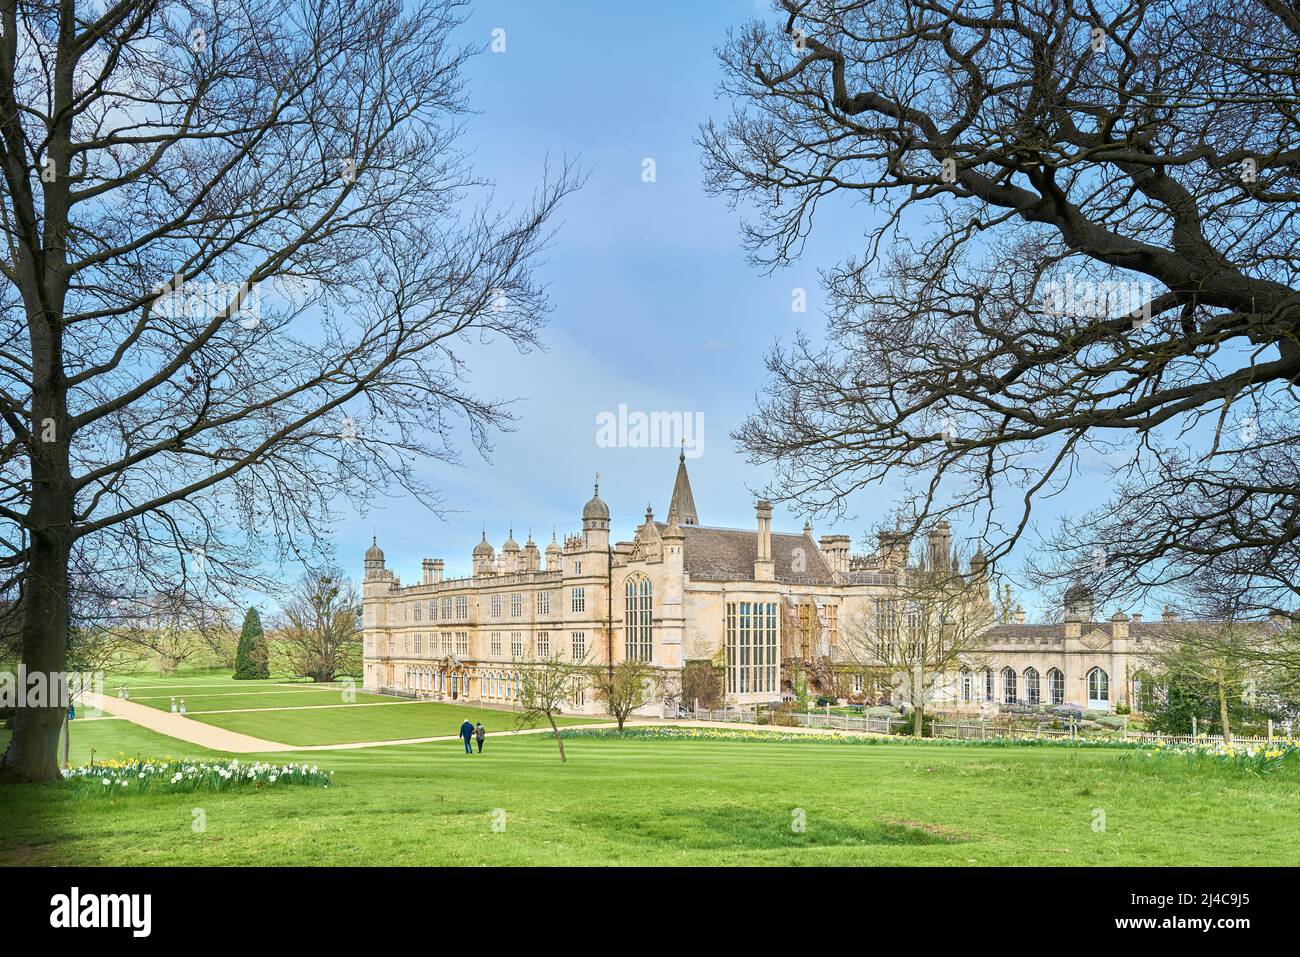 Spring weather in the South garden at Burghley House, Stamford, England, an elizabethan mansion owned by the Cecil family. Stock Photo